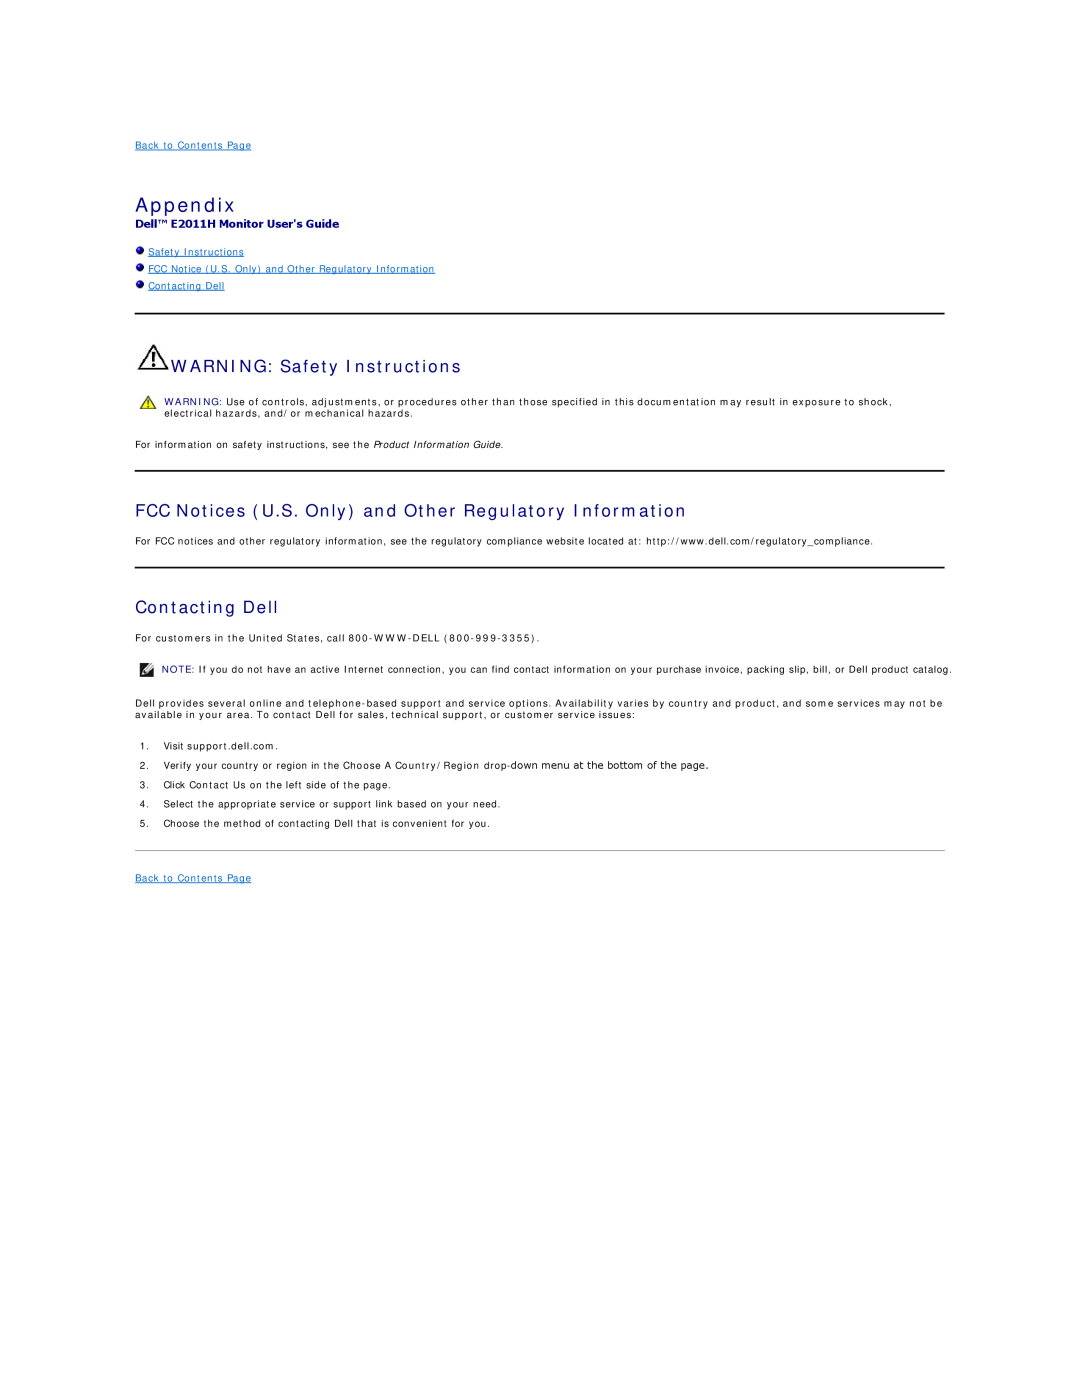 Dell E2011HC appendix Appendix, WARNING Safety Instructions, FCC Notices U.S. Only and Other Regulatory Information 